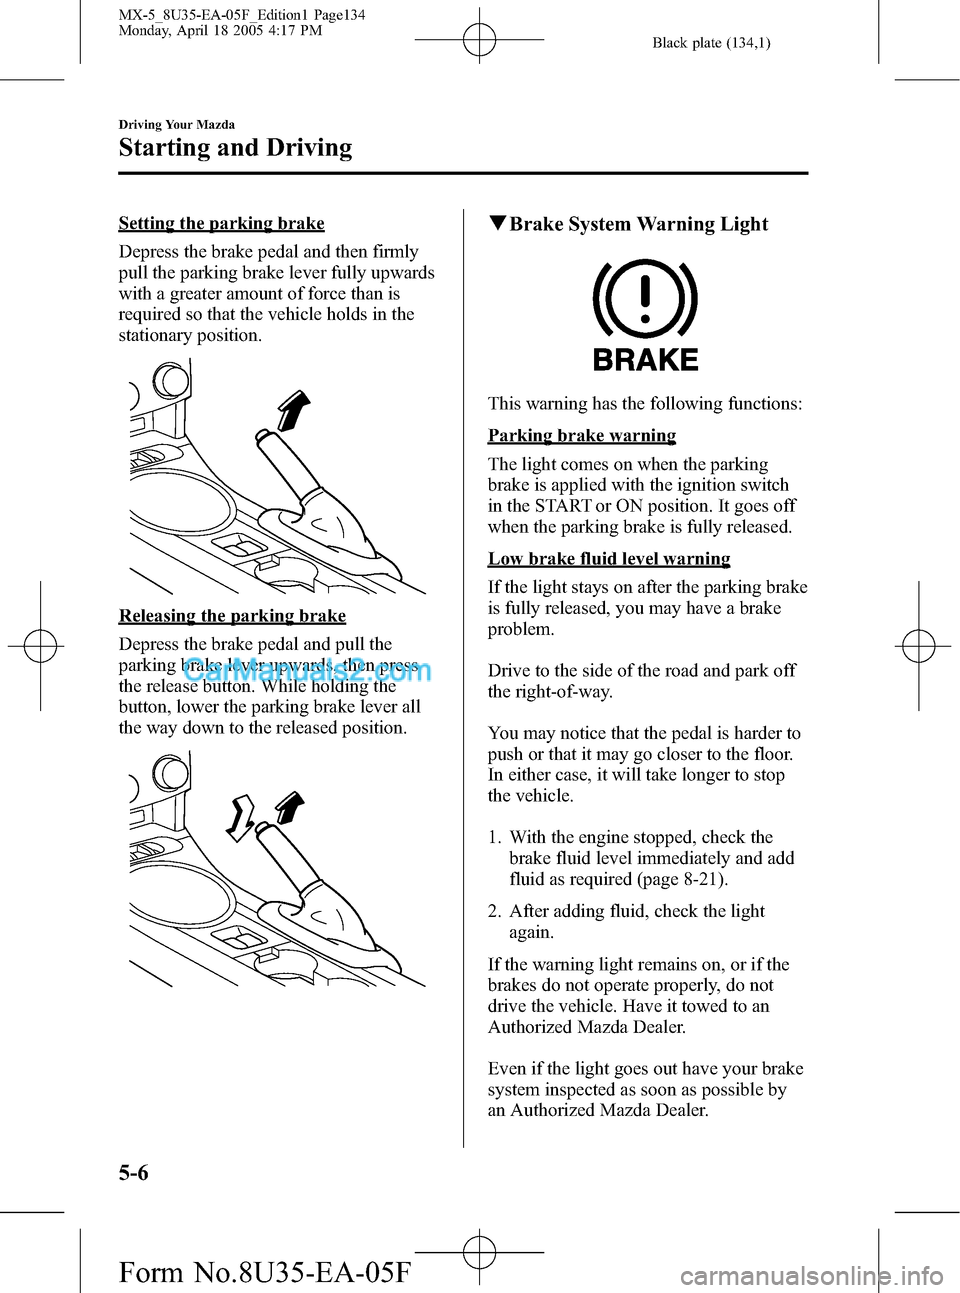 MAZDA MODEL MX-5 2006  Owners Manual (in English) Black plate (134,1)
Setting the parking brake
Depress the brake pedal and then firmly
pull the parking brake lever fully upwards
with a greater amount of force than is
required so that the vehicle hol